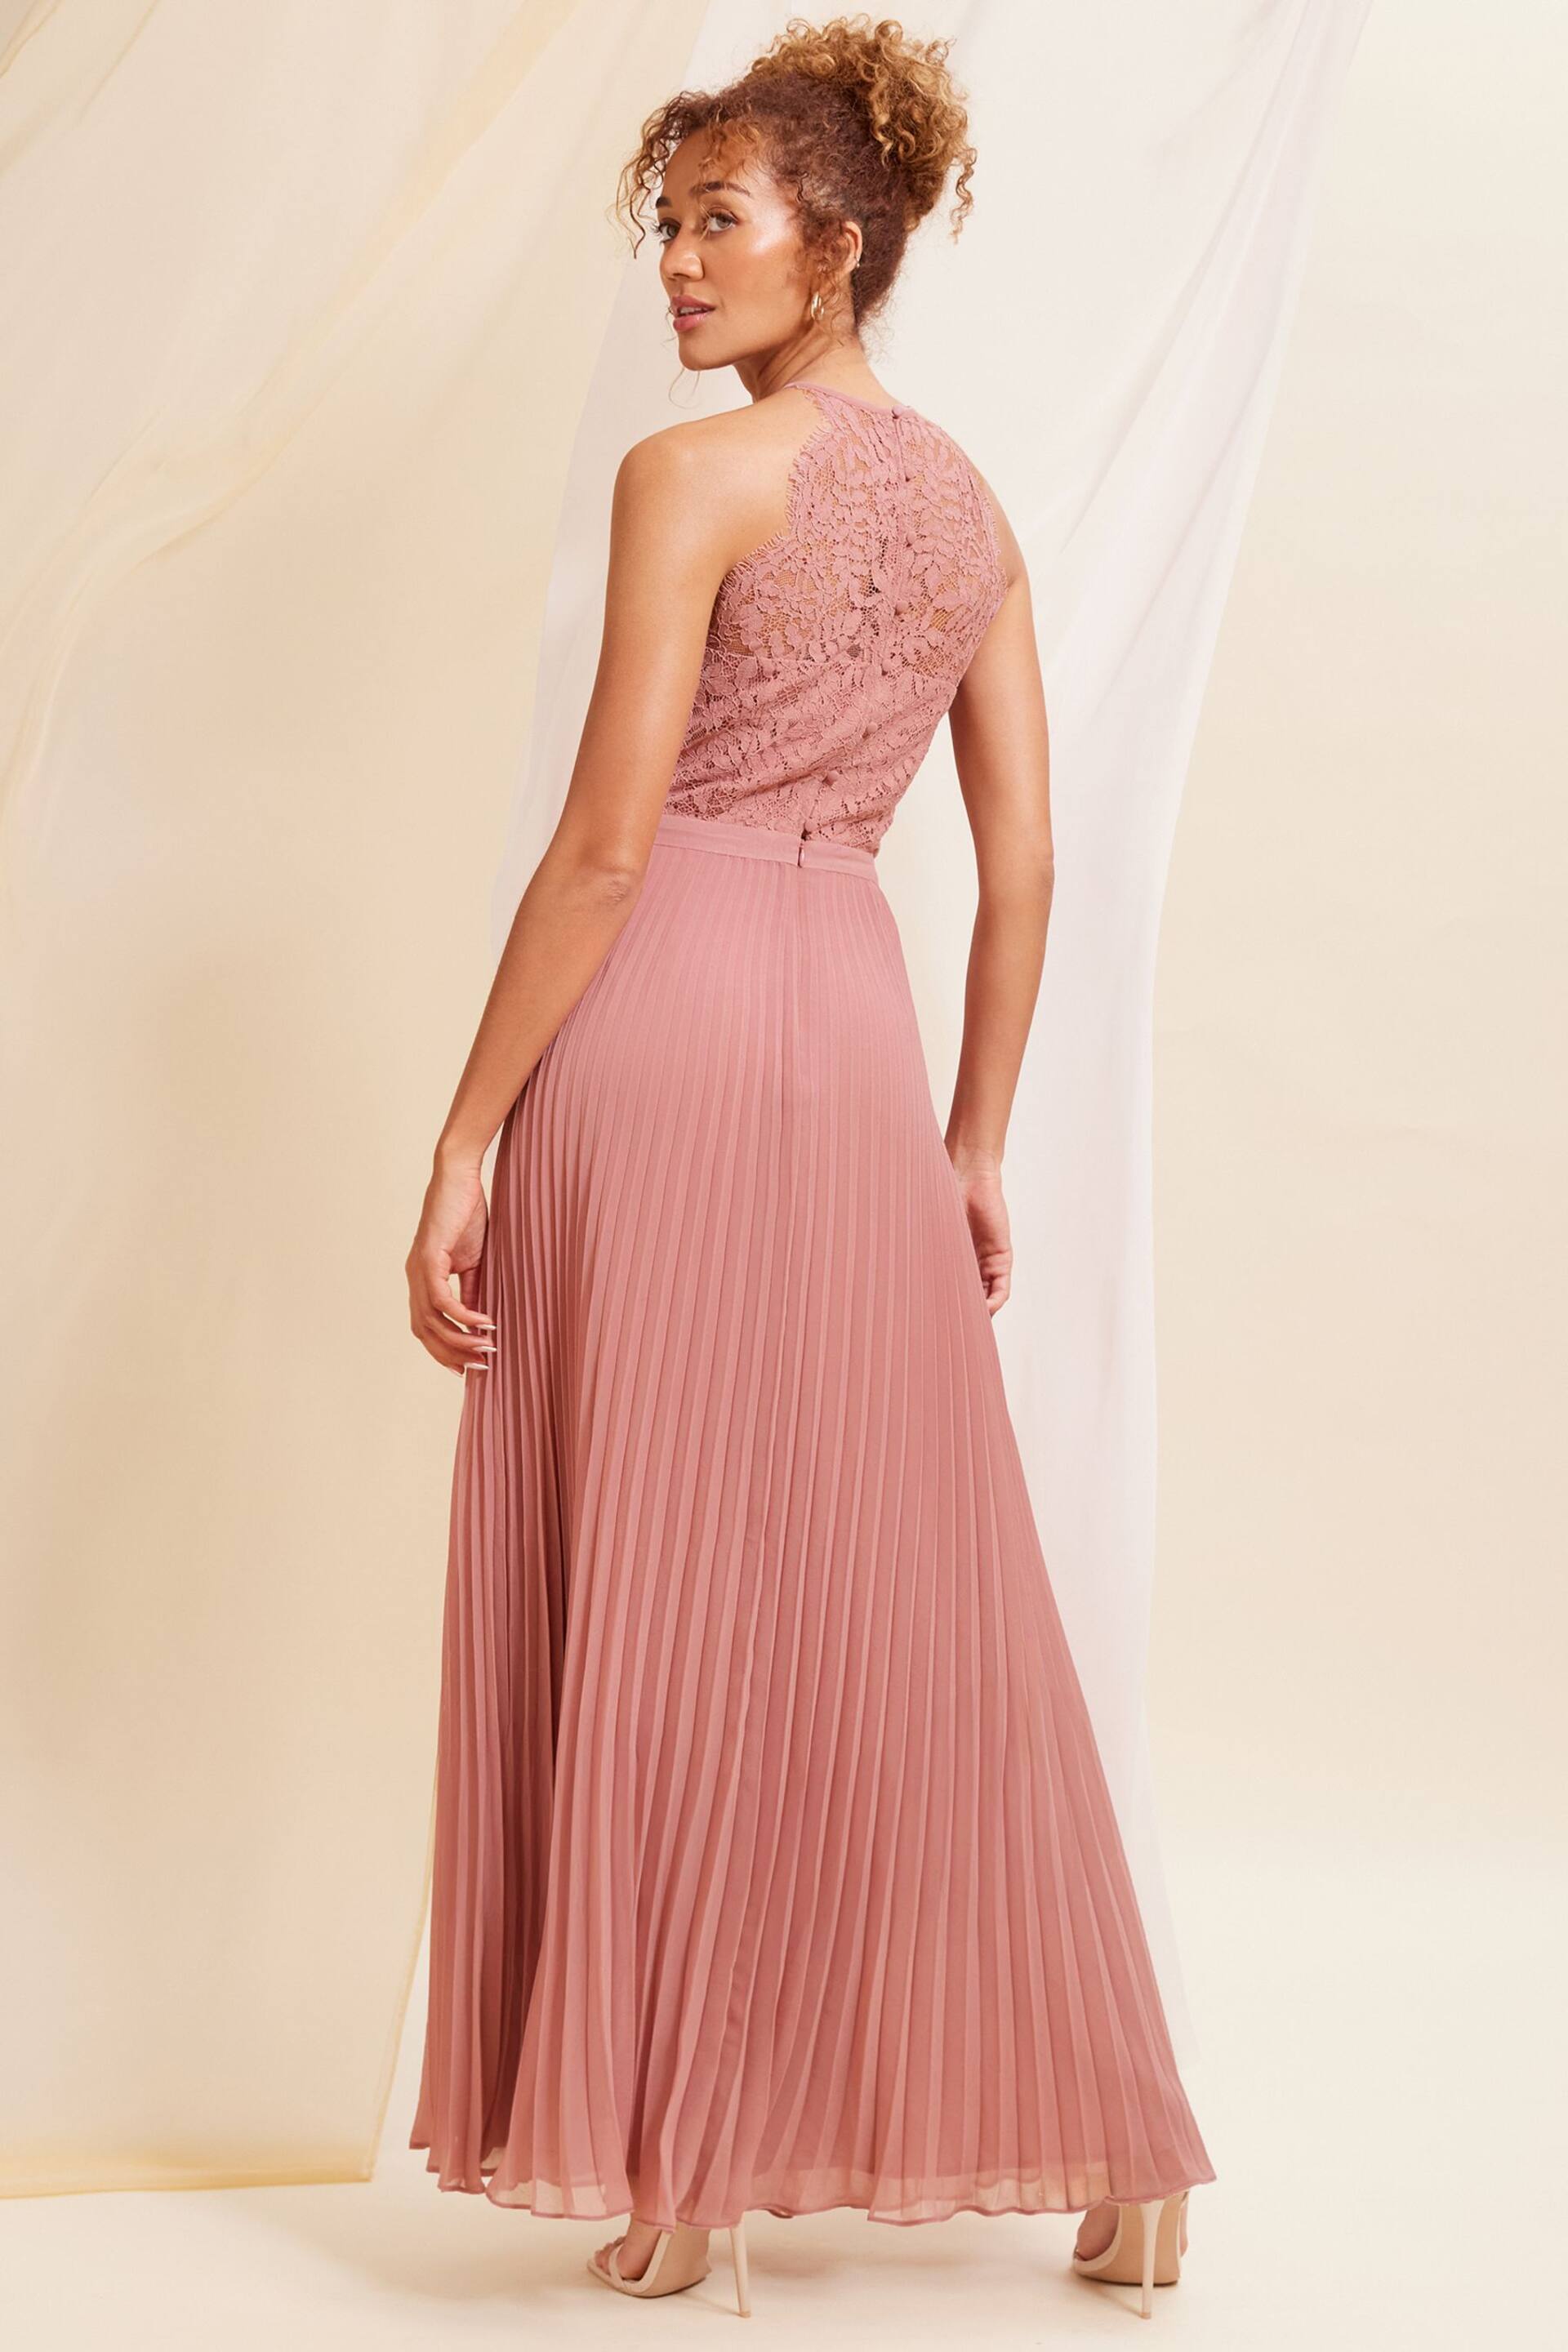 Love & Roses Pink Petite Pleated Lace Insert Bridesmaid Maxi Dress - Image 3 of 4